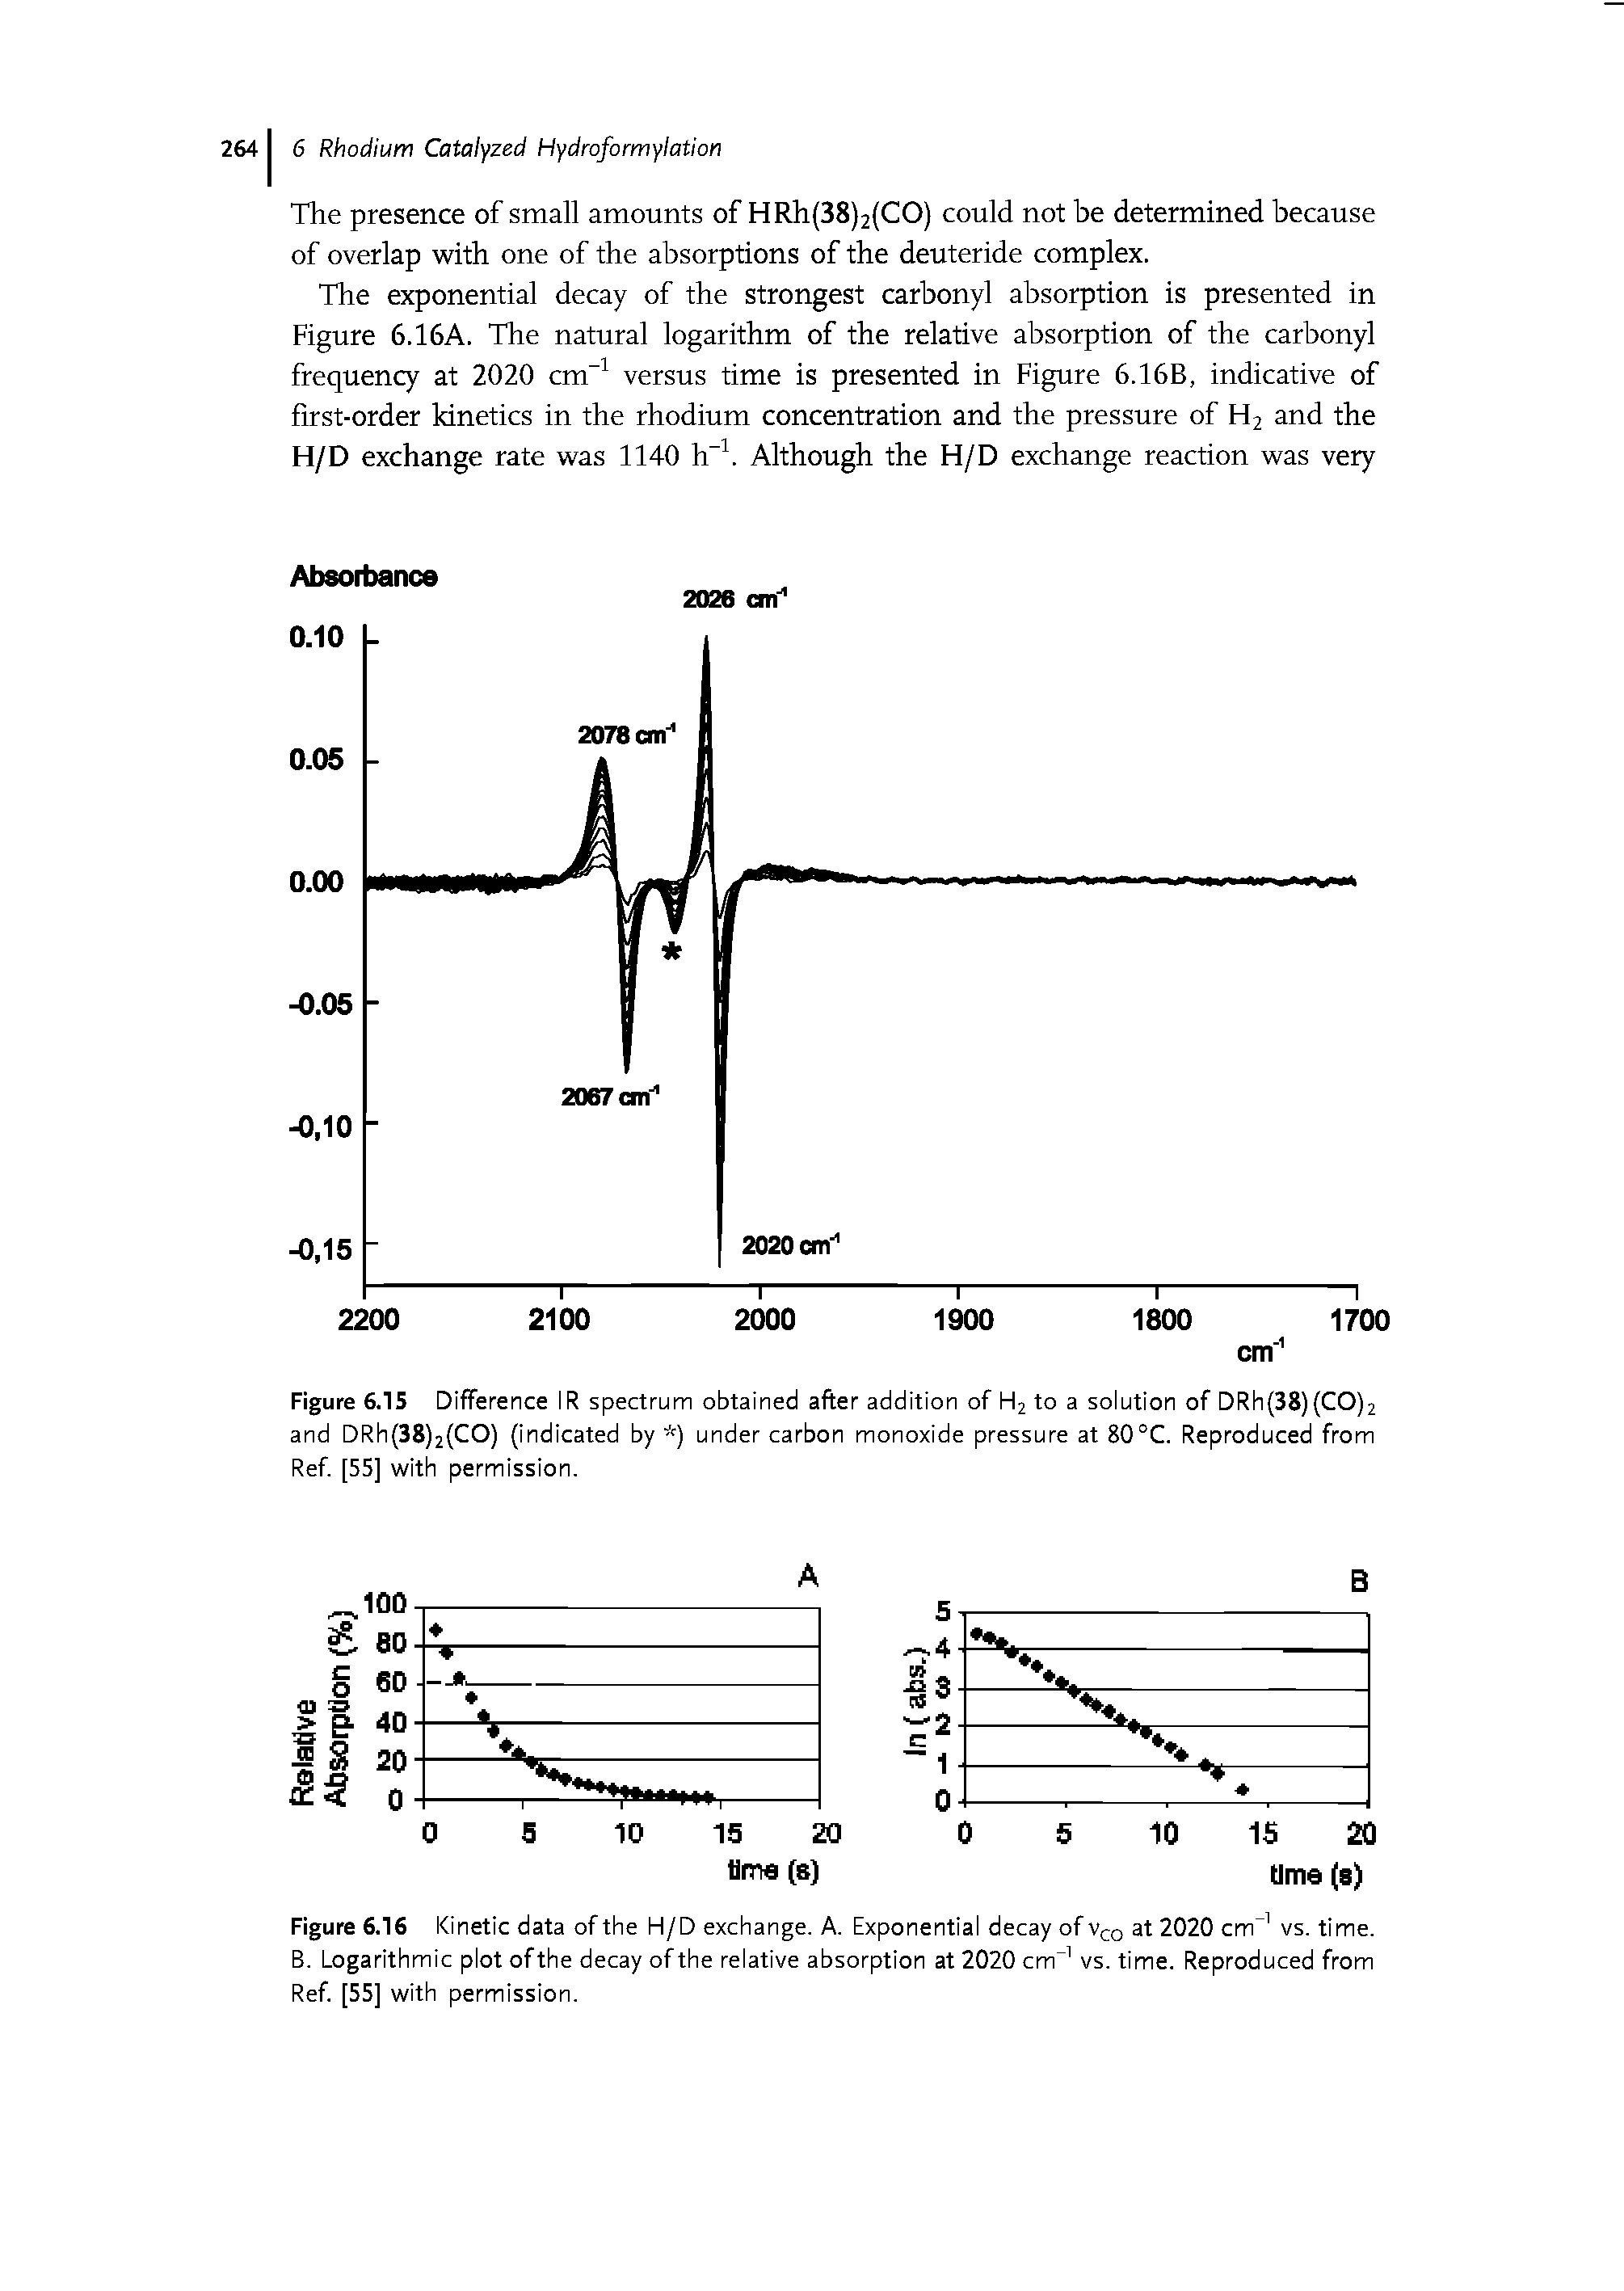 Figure 6.1S Difference IR spectrum obtained after addition of H2 to a solution of DRh(38)(CO)2 and DRh(38)2(CO) (indicated by ) under carbon monoxide pressure at 80°C. Reproduced from Ref [55] with permission.